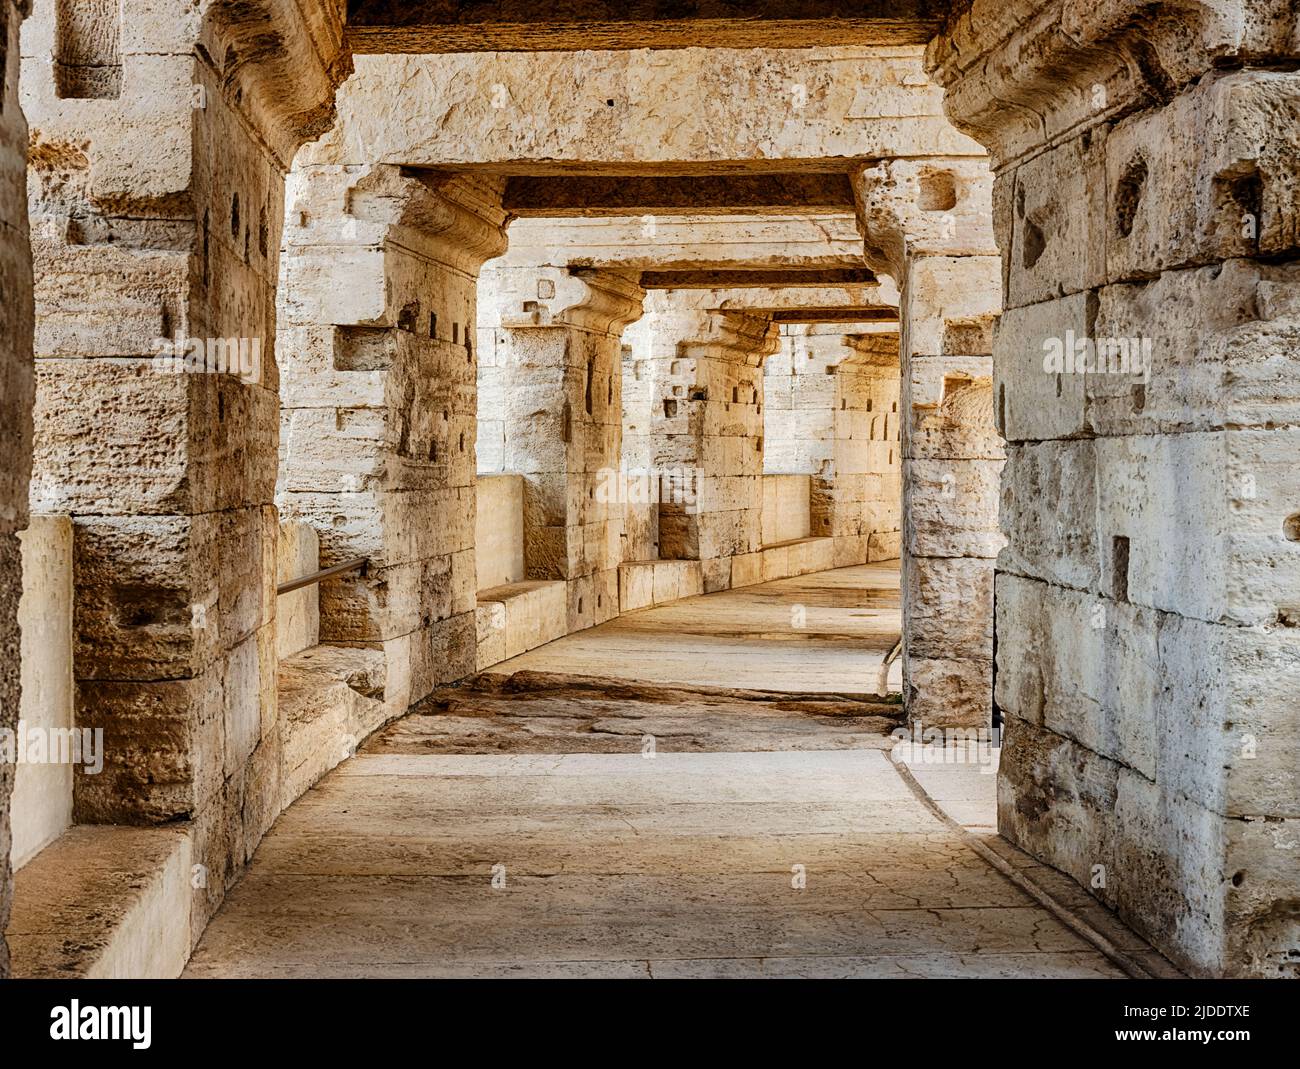 A broad concourse with stone pillars circles the old Roman ampitheatre in Arles. Stock Photo